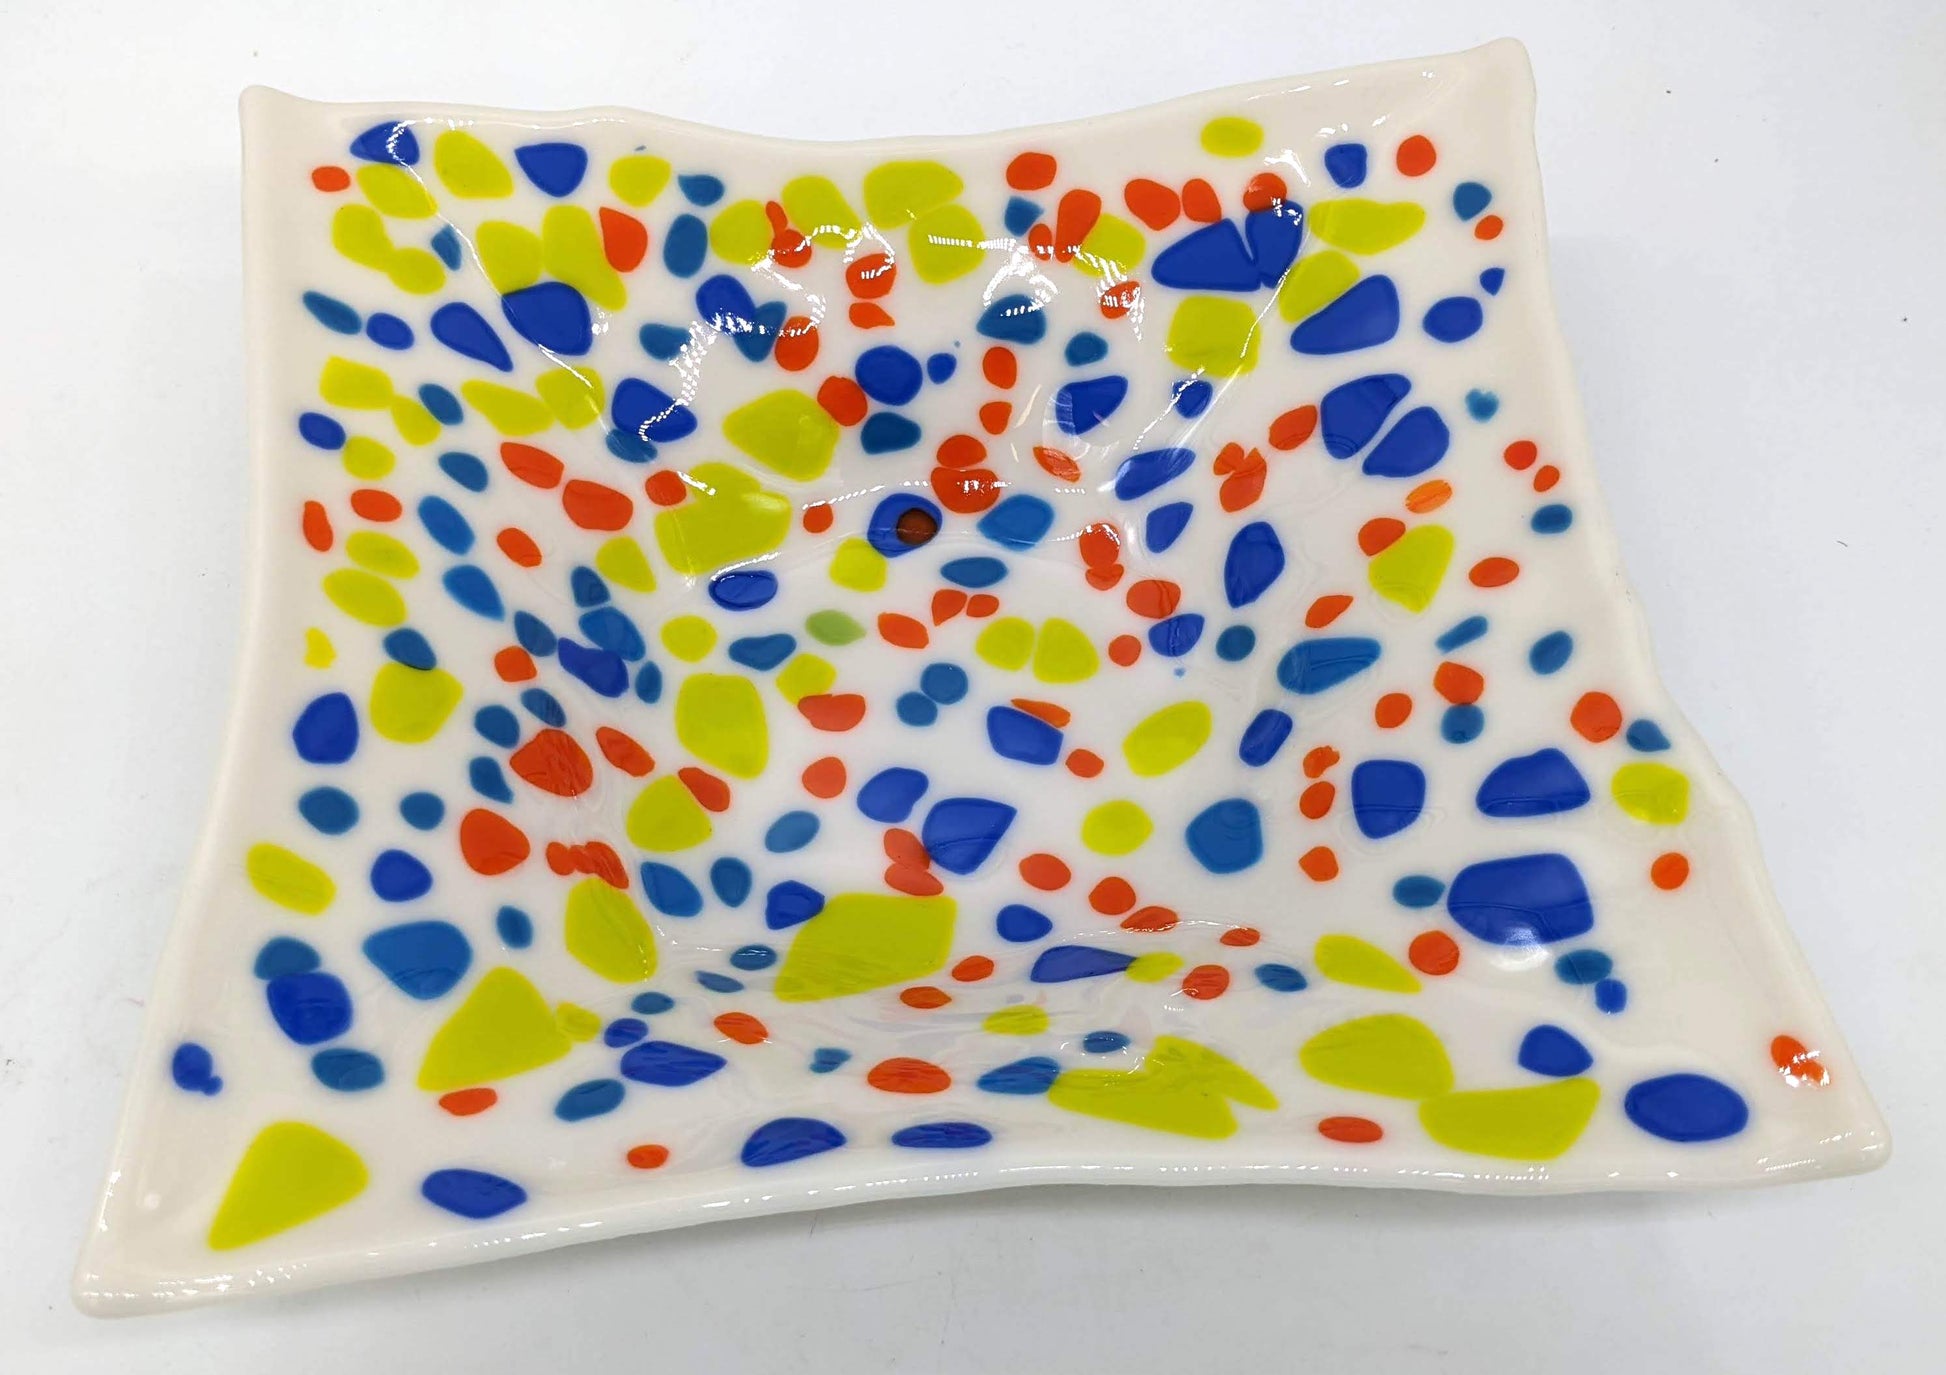 white square glass bowl with spots of blue, orange, and light green throughout